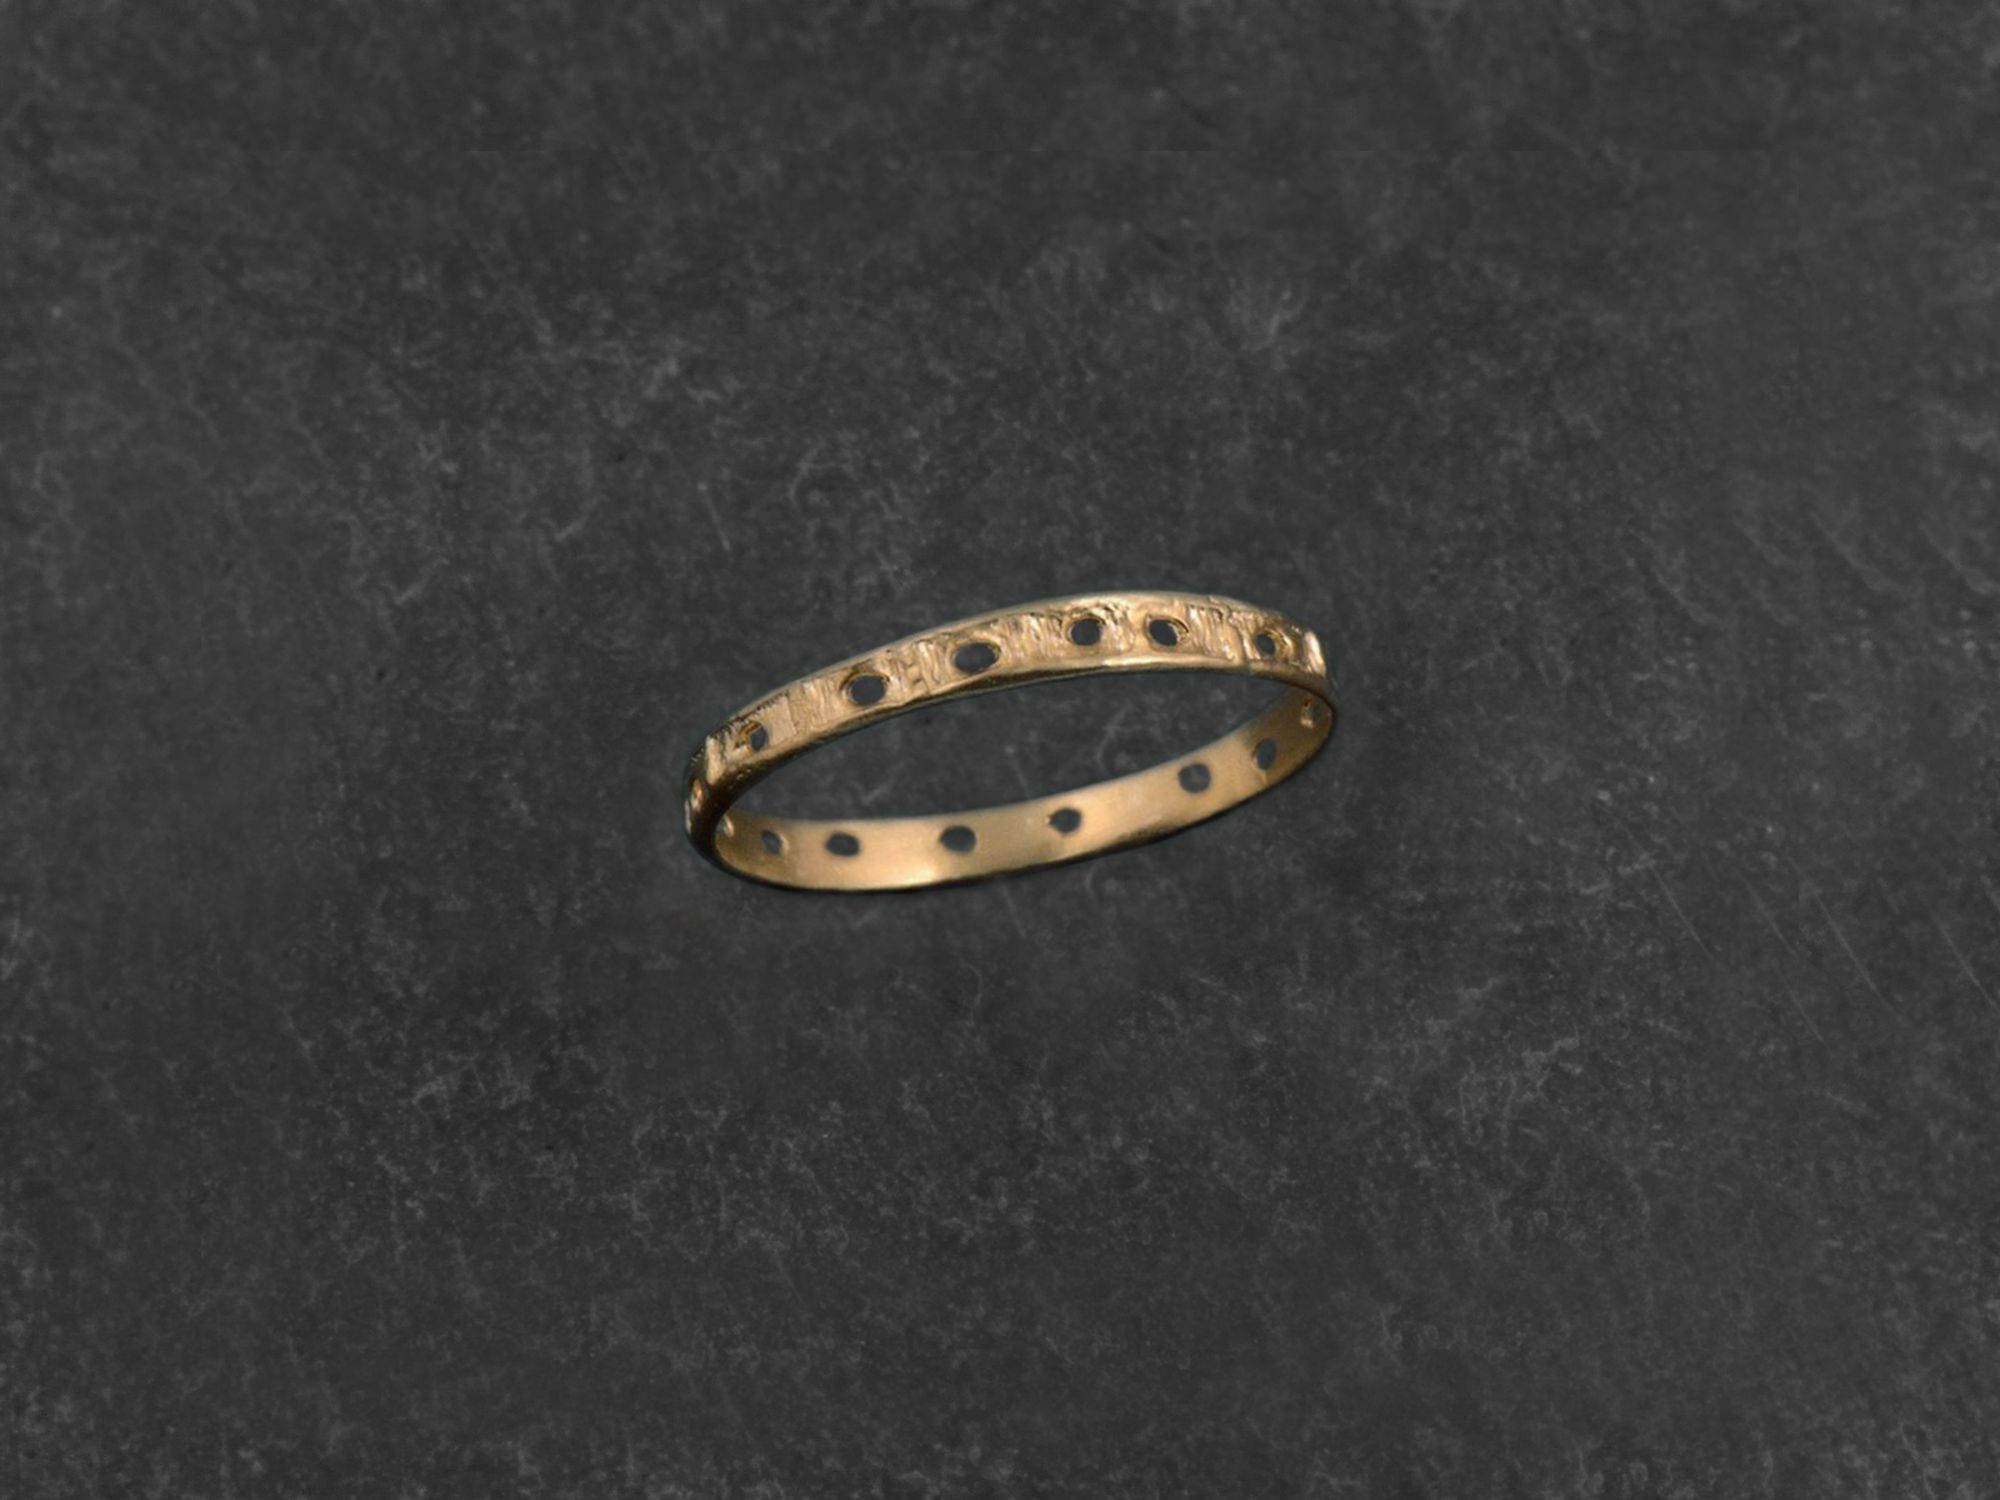 Minos peforated yellow gold ring by Emmanuelle Zysman